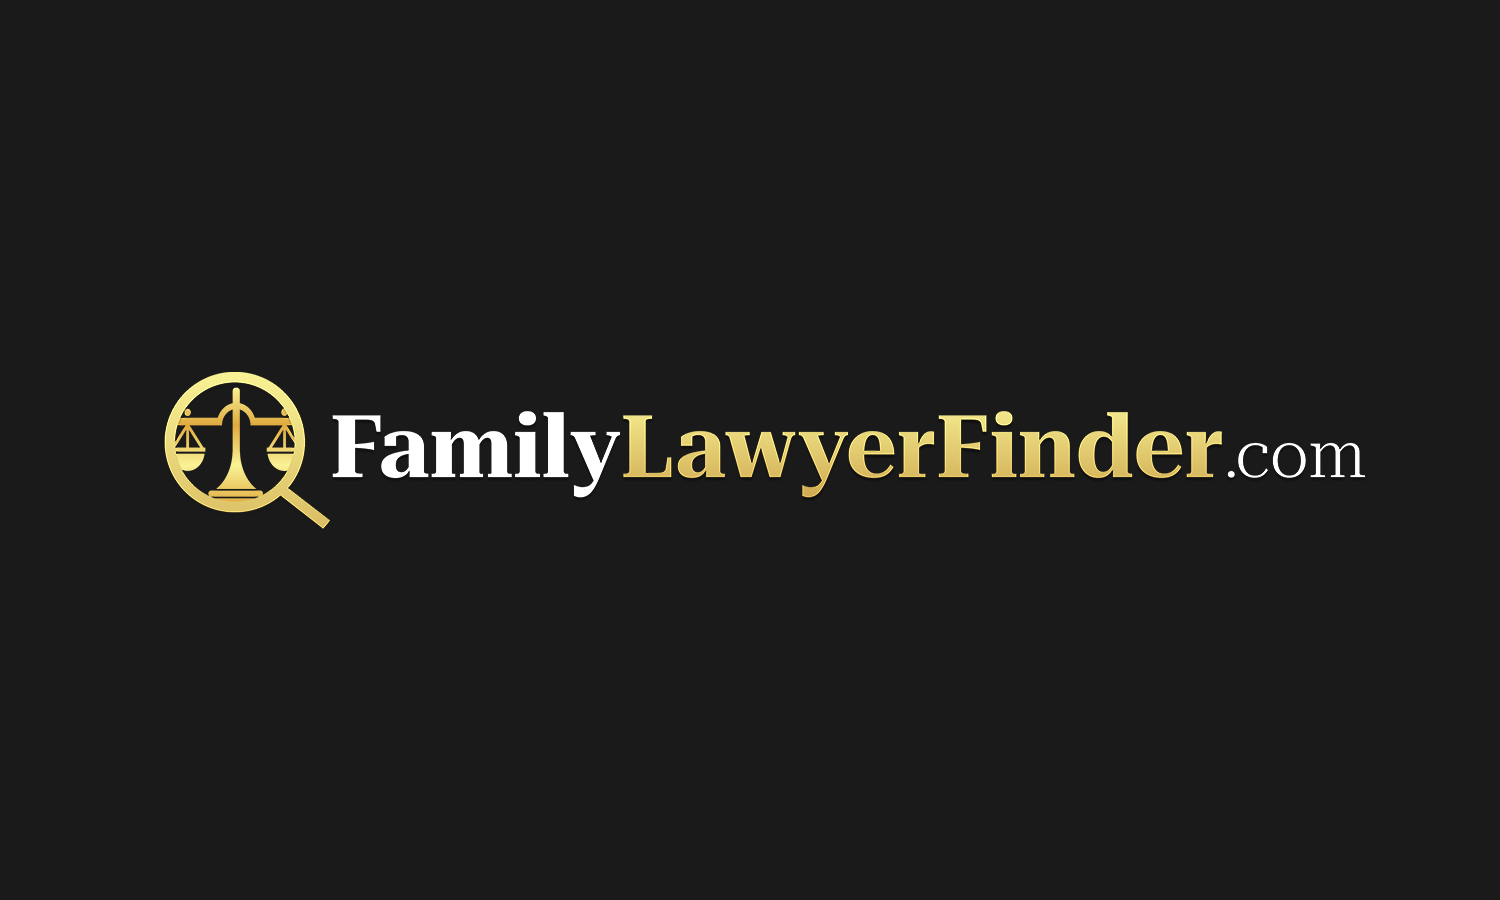 The Best 12 Family Lawyers In Melbourne (Updated 2023) | ⚖️ Top Rated Family Solicitors by Family Lawyer Finder Melbourne ™